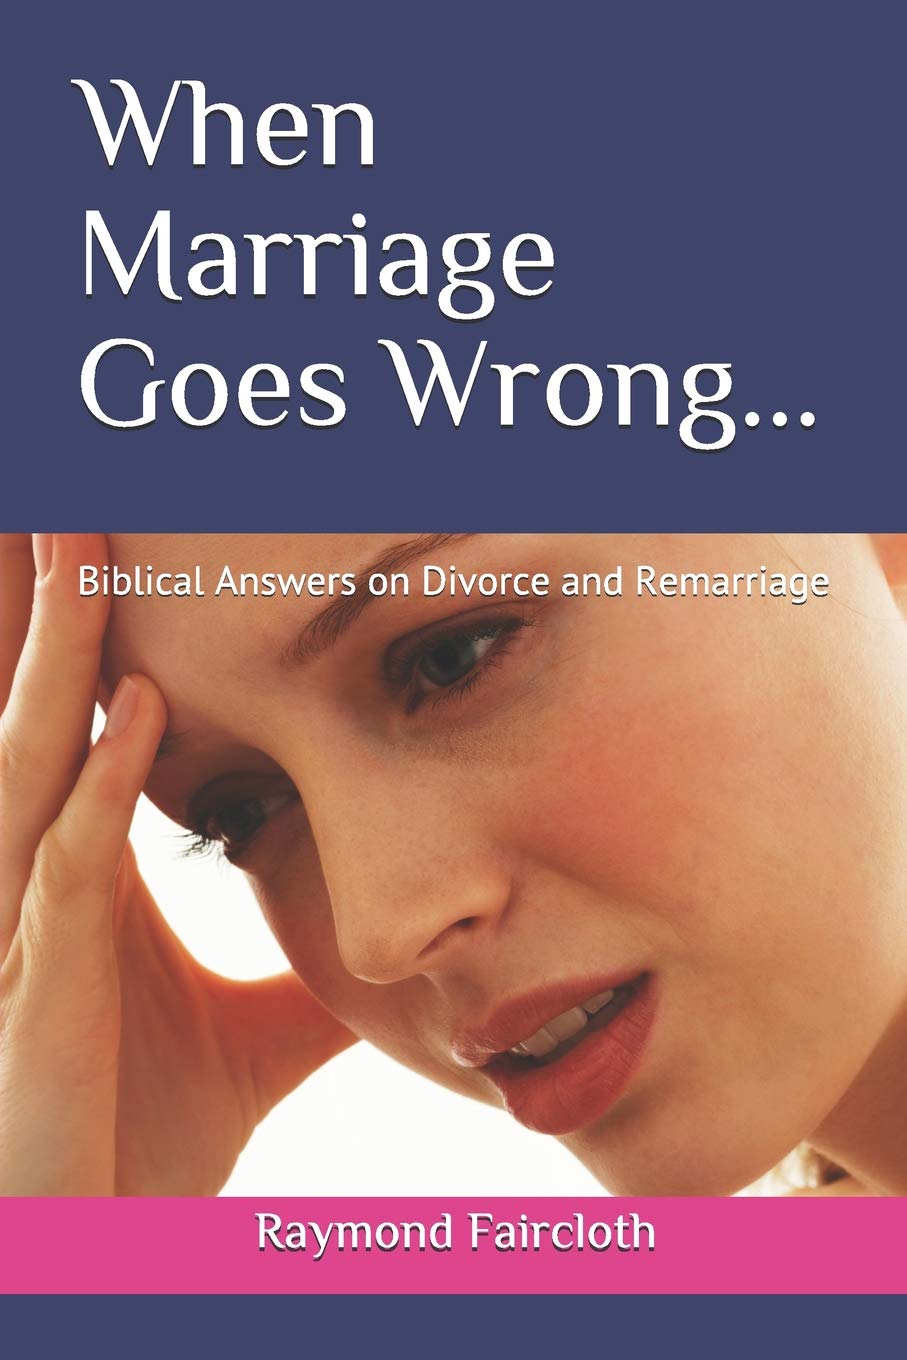 When Marriage Goes Wrong...: Biblical Answers on Divorce and Remarriage (Concise Studies in the Scriptures) Paperback – 31 Dec 2018